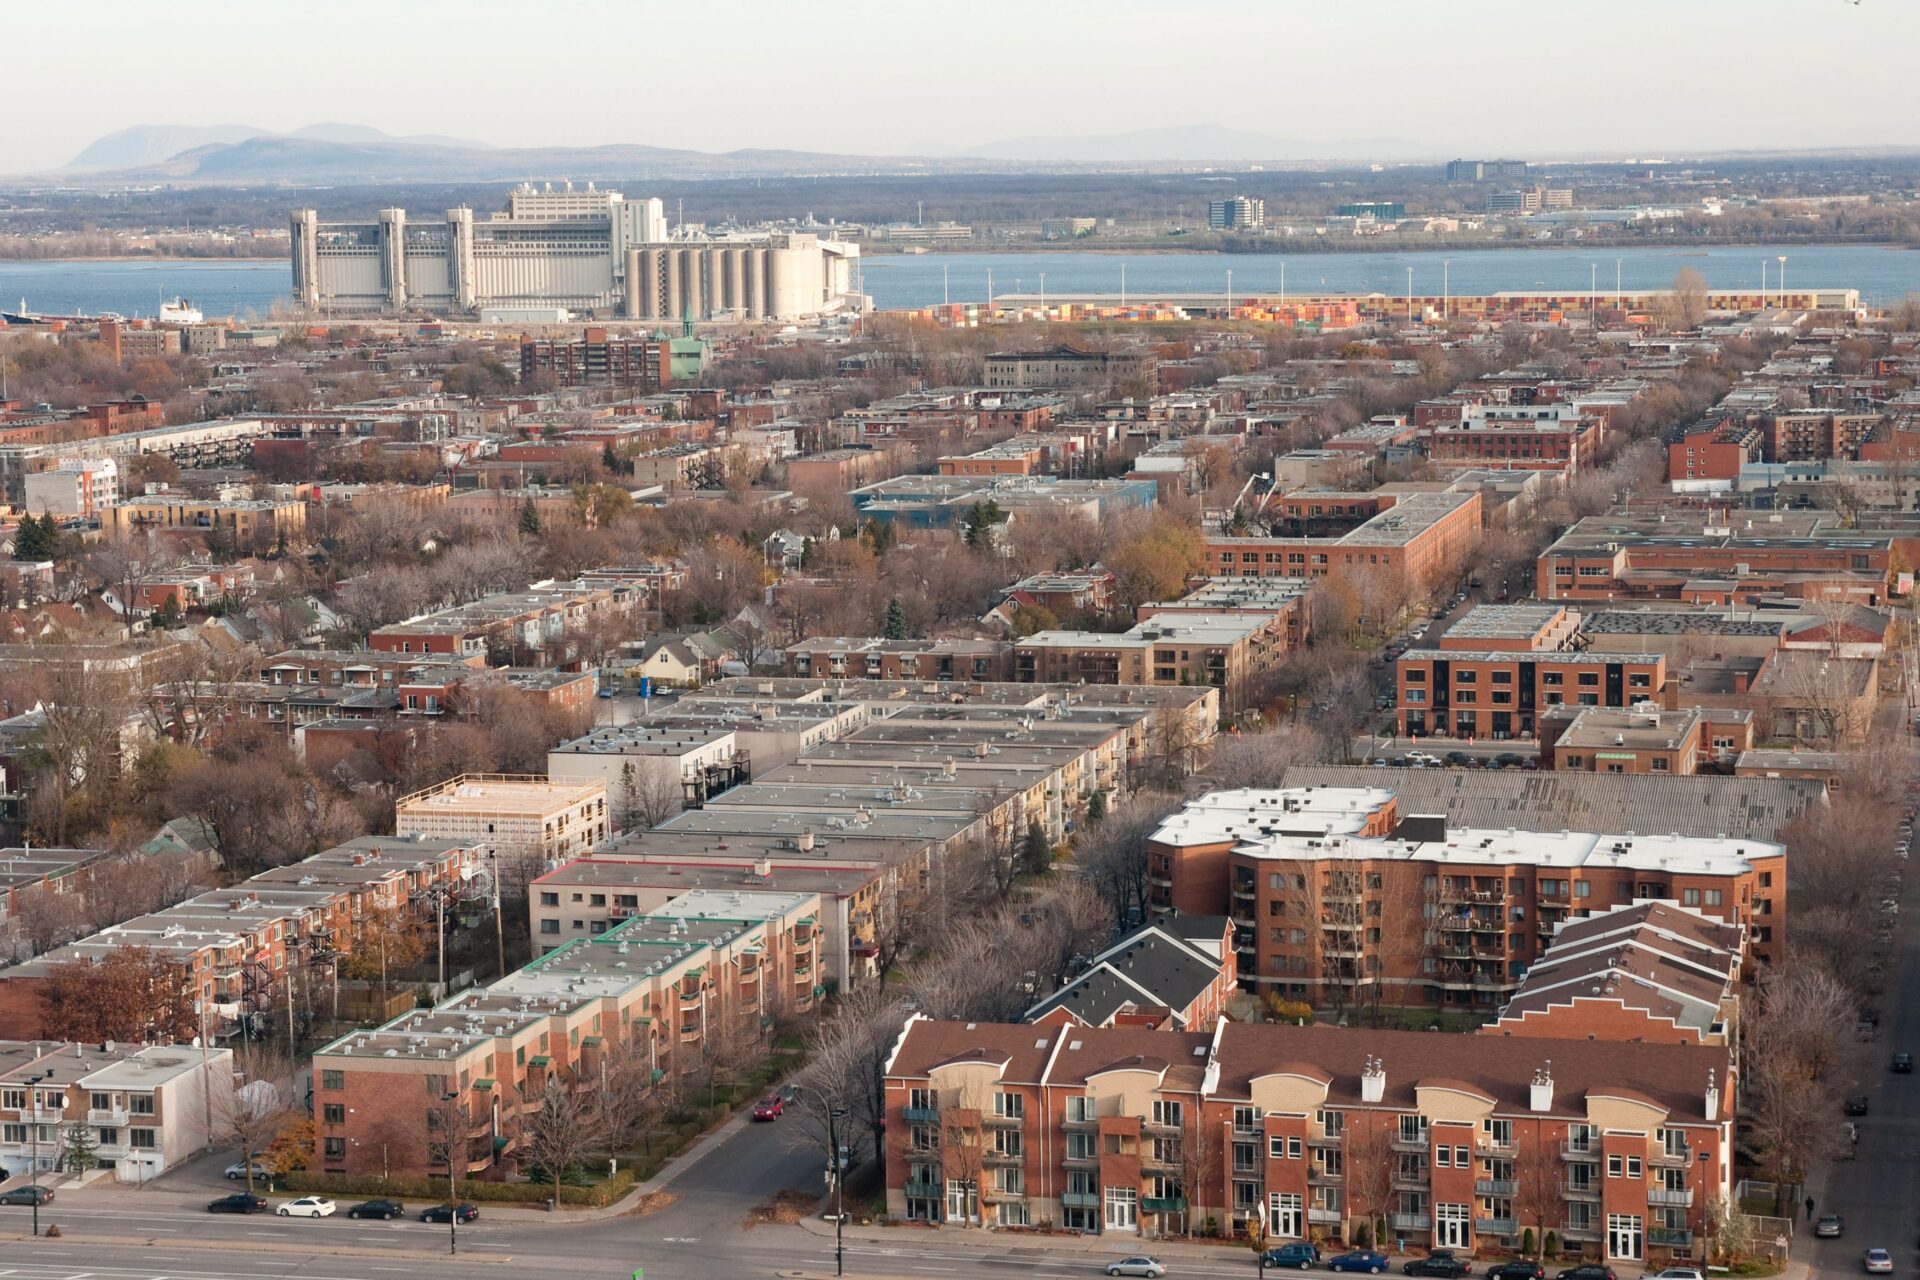 An aerial view of the streets of the neighbourhood with the St. Lawrence River in the distance. The area is characterized by brick rowhouses and plexes three and four storeys high, with mature trees lining most streets.